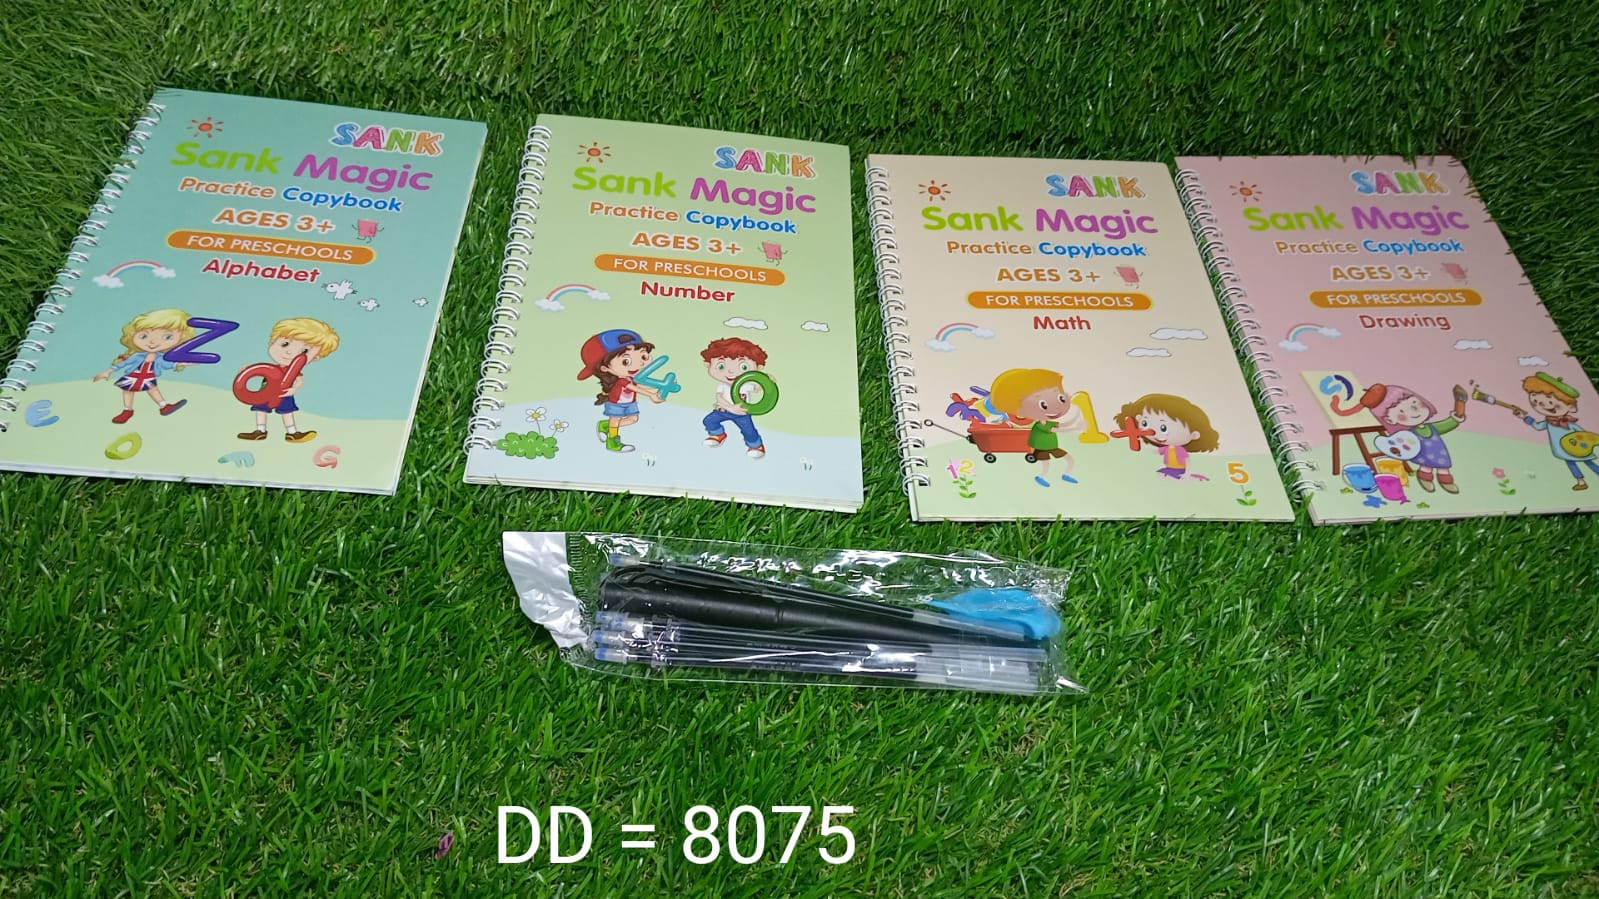 8075 4 Pc Magic Copybook widely used by kids, childrenâ€™s and even adults also to write down important things over it while emergencies etc.